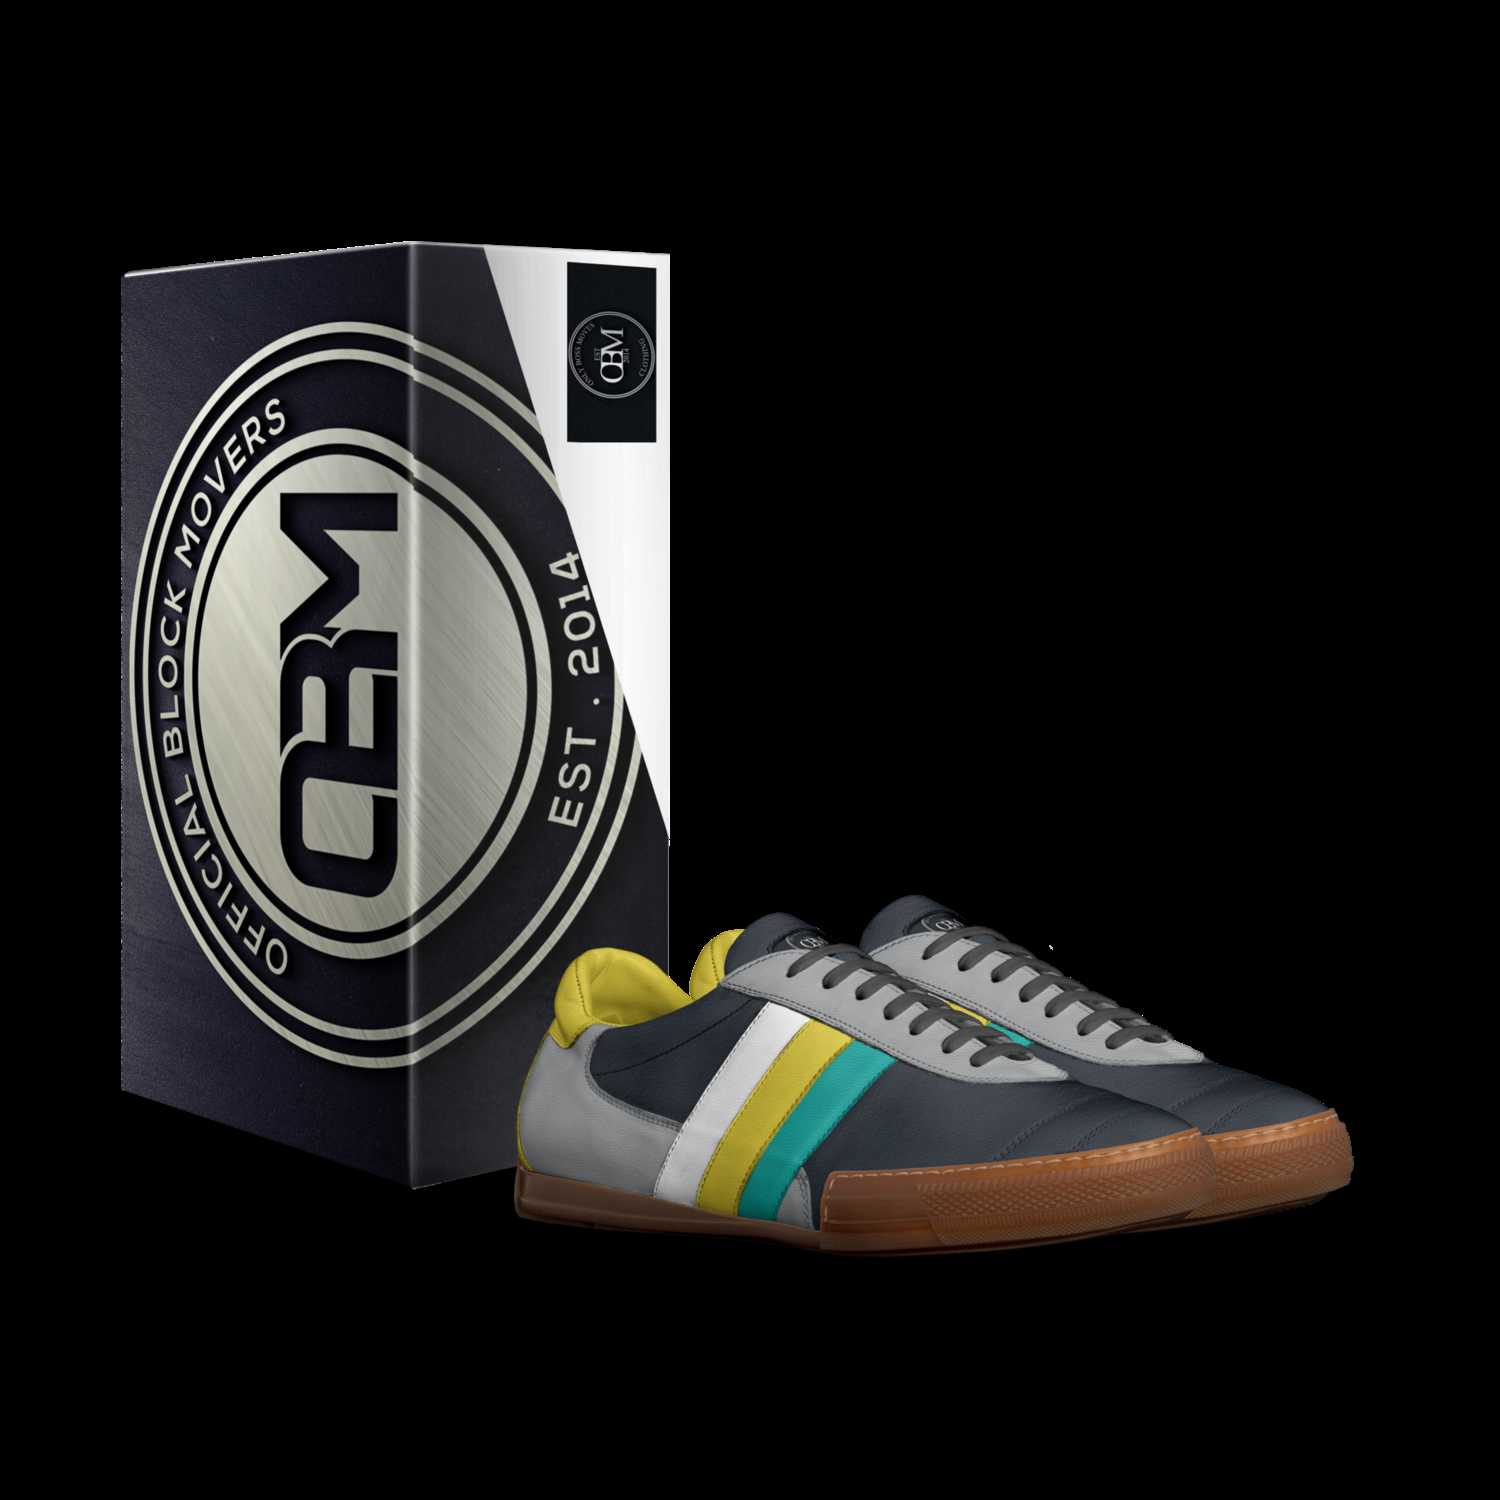 Top more than 209 stax shoes